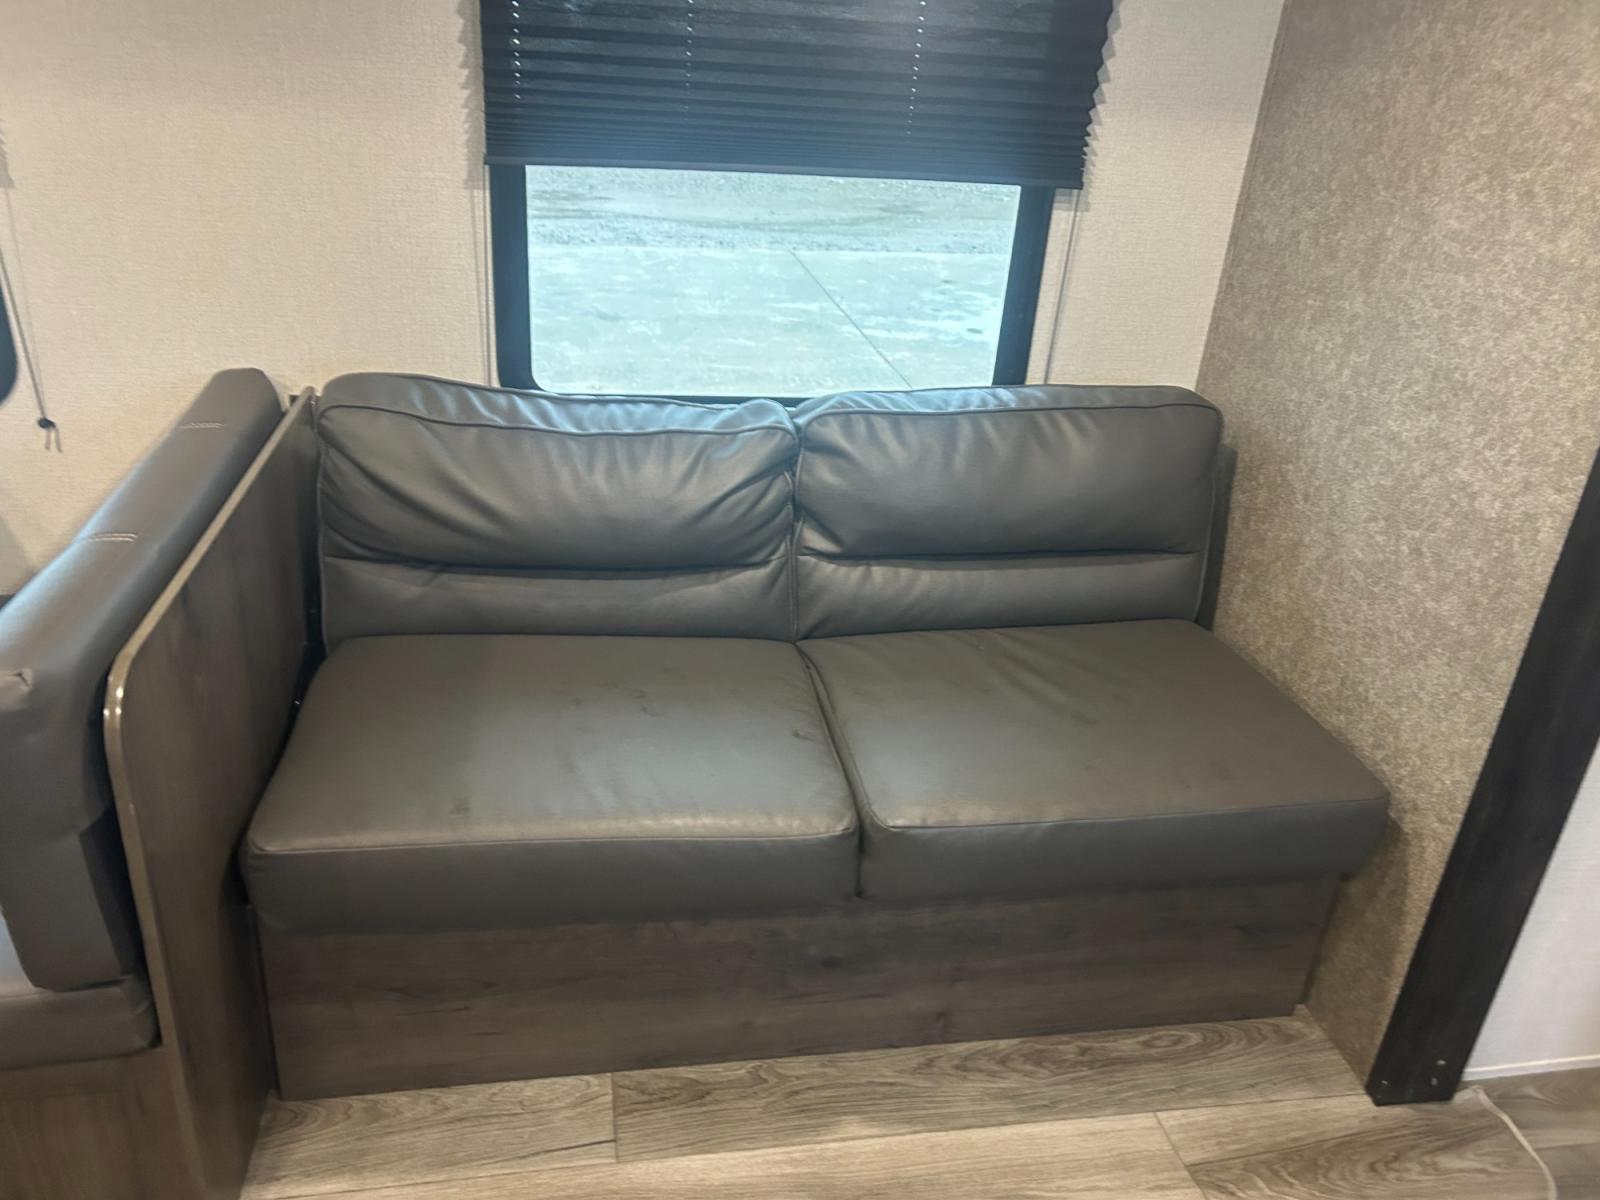 2021 White /TAN Highland Ridge RV, Inc OPEN RANGE 26BHS (58TBH0BP7M1) , located at 17760 Hwy 62, Morris, OK, 74445, 35.609104, -95.877060 - 2021 HIGHLAND RIDGE OPEN RANGE IS PERFECT FOR A SMALL FAMILY OR A LARGE. THIS CAMPER IS 30.5FT LONG AND WILL SLEEP 10 PEOPLE. FEATURES A 16FT POWER AWNING, OUTSIDE STORAGE, DOUBLE AXEL, SINGLE SLIDE OUT, POWER HITCH, AND MANUAL JACKS. IN THE FRONT OF THIS CAMPER IS A QUEEN SIZED BED WITH OVERHEAD ST - Photo #16